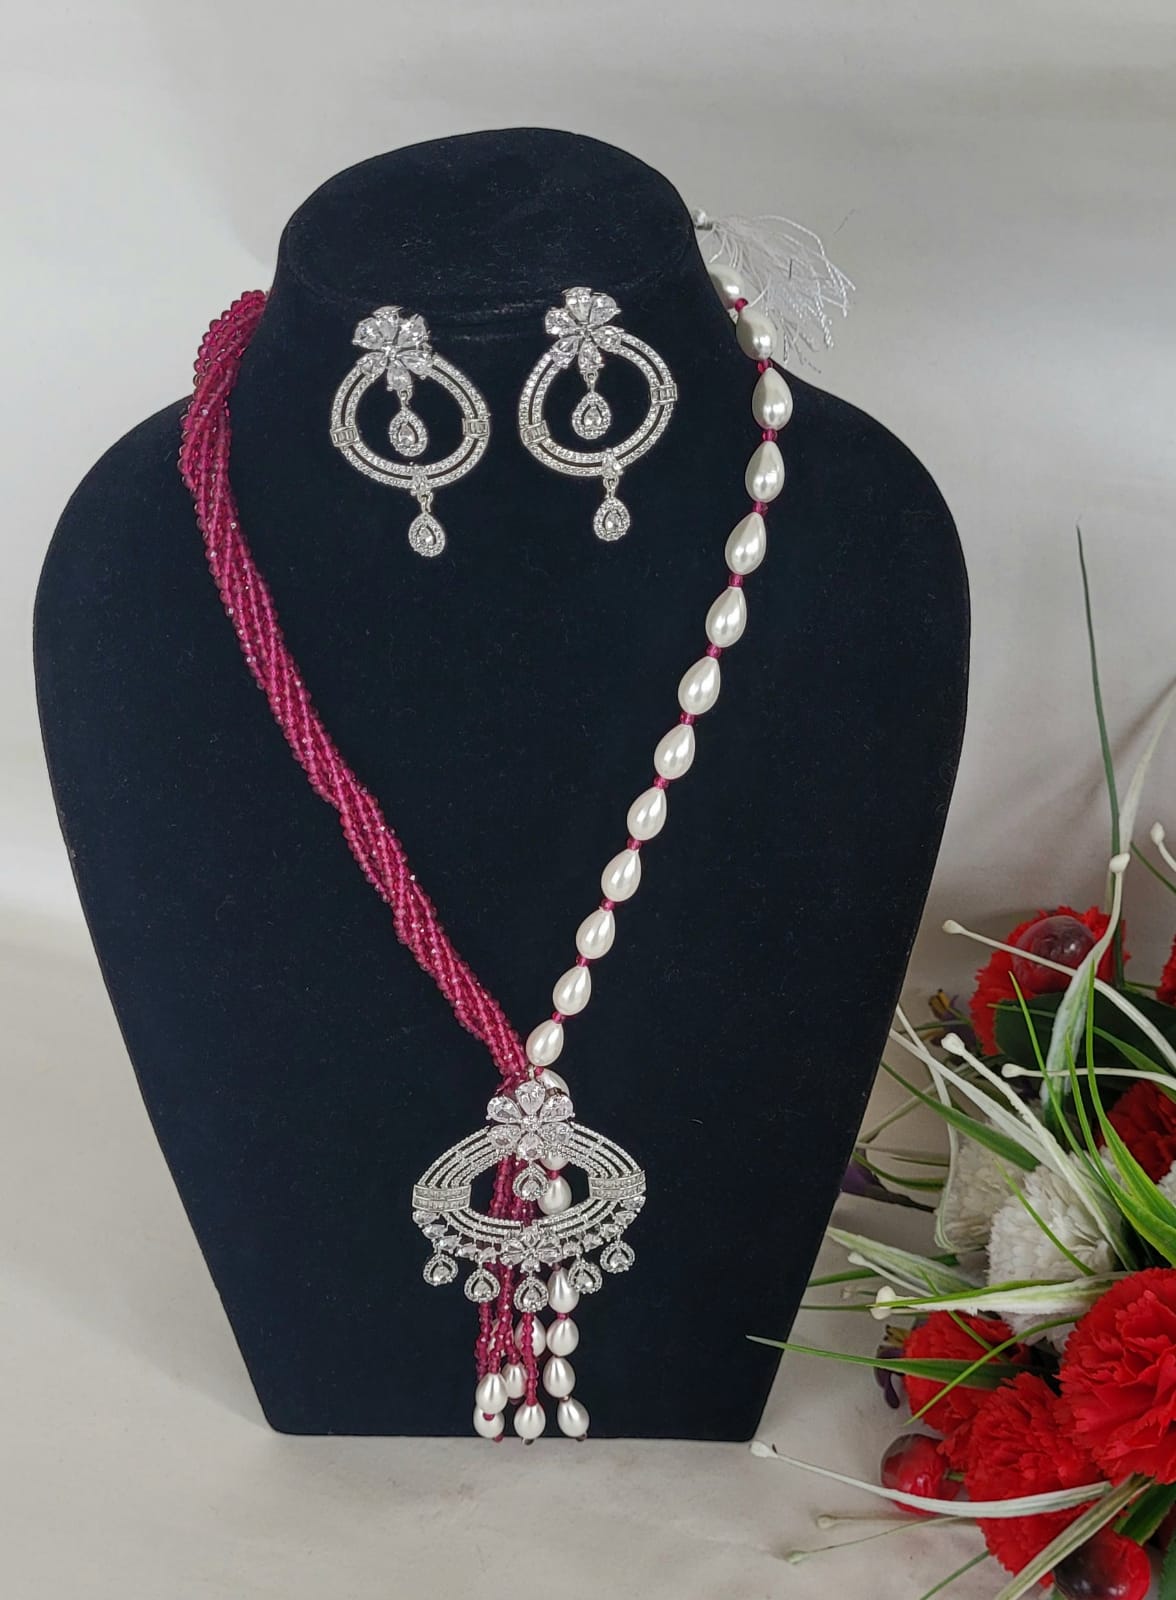 I Jewels Navratri Ethnic Silver Oxidised Long Necklace Jewellery With Drop  Earrings Set For Women/Girls (MC170OX) - I Jewels - 4216382